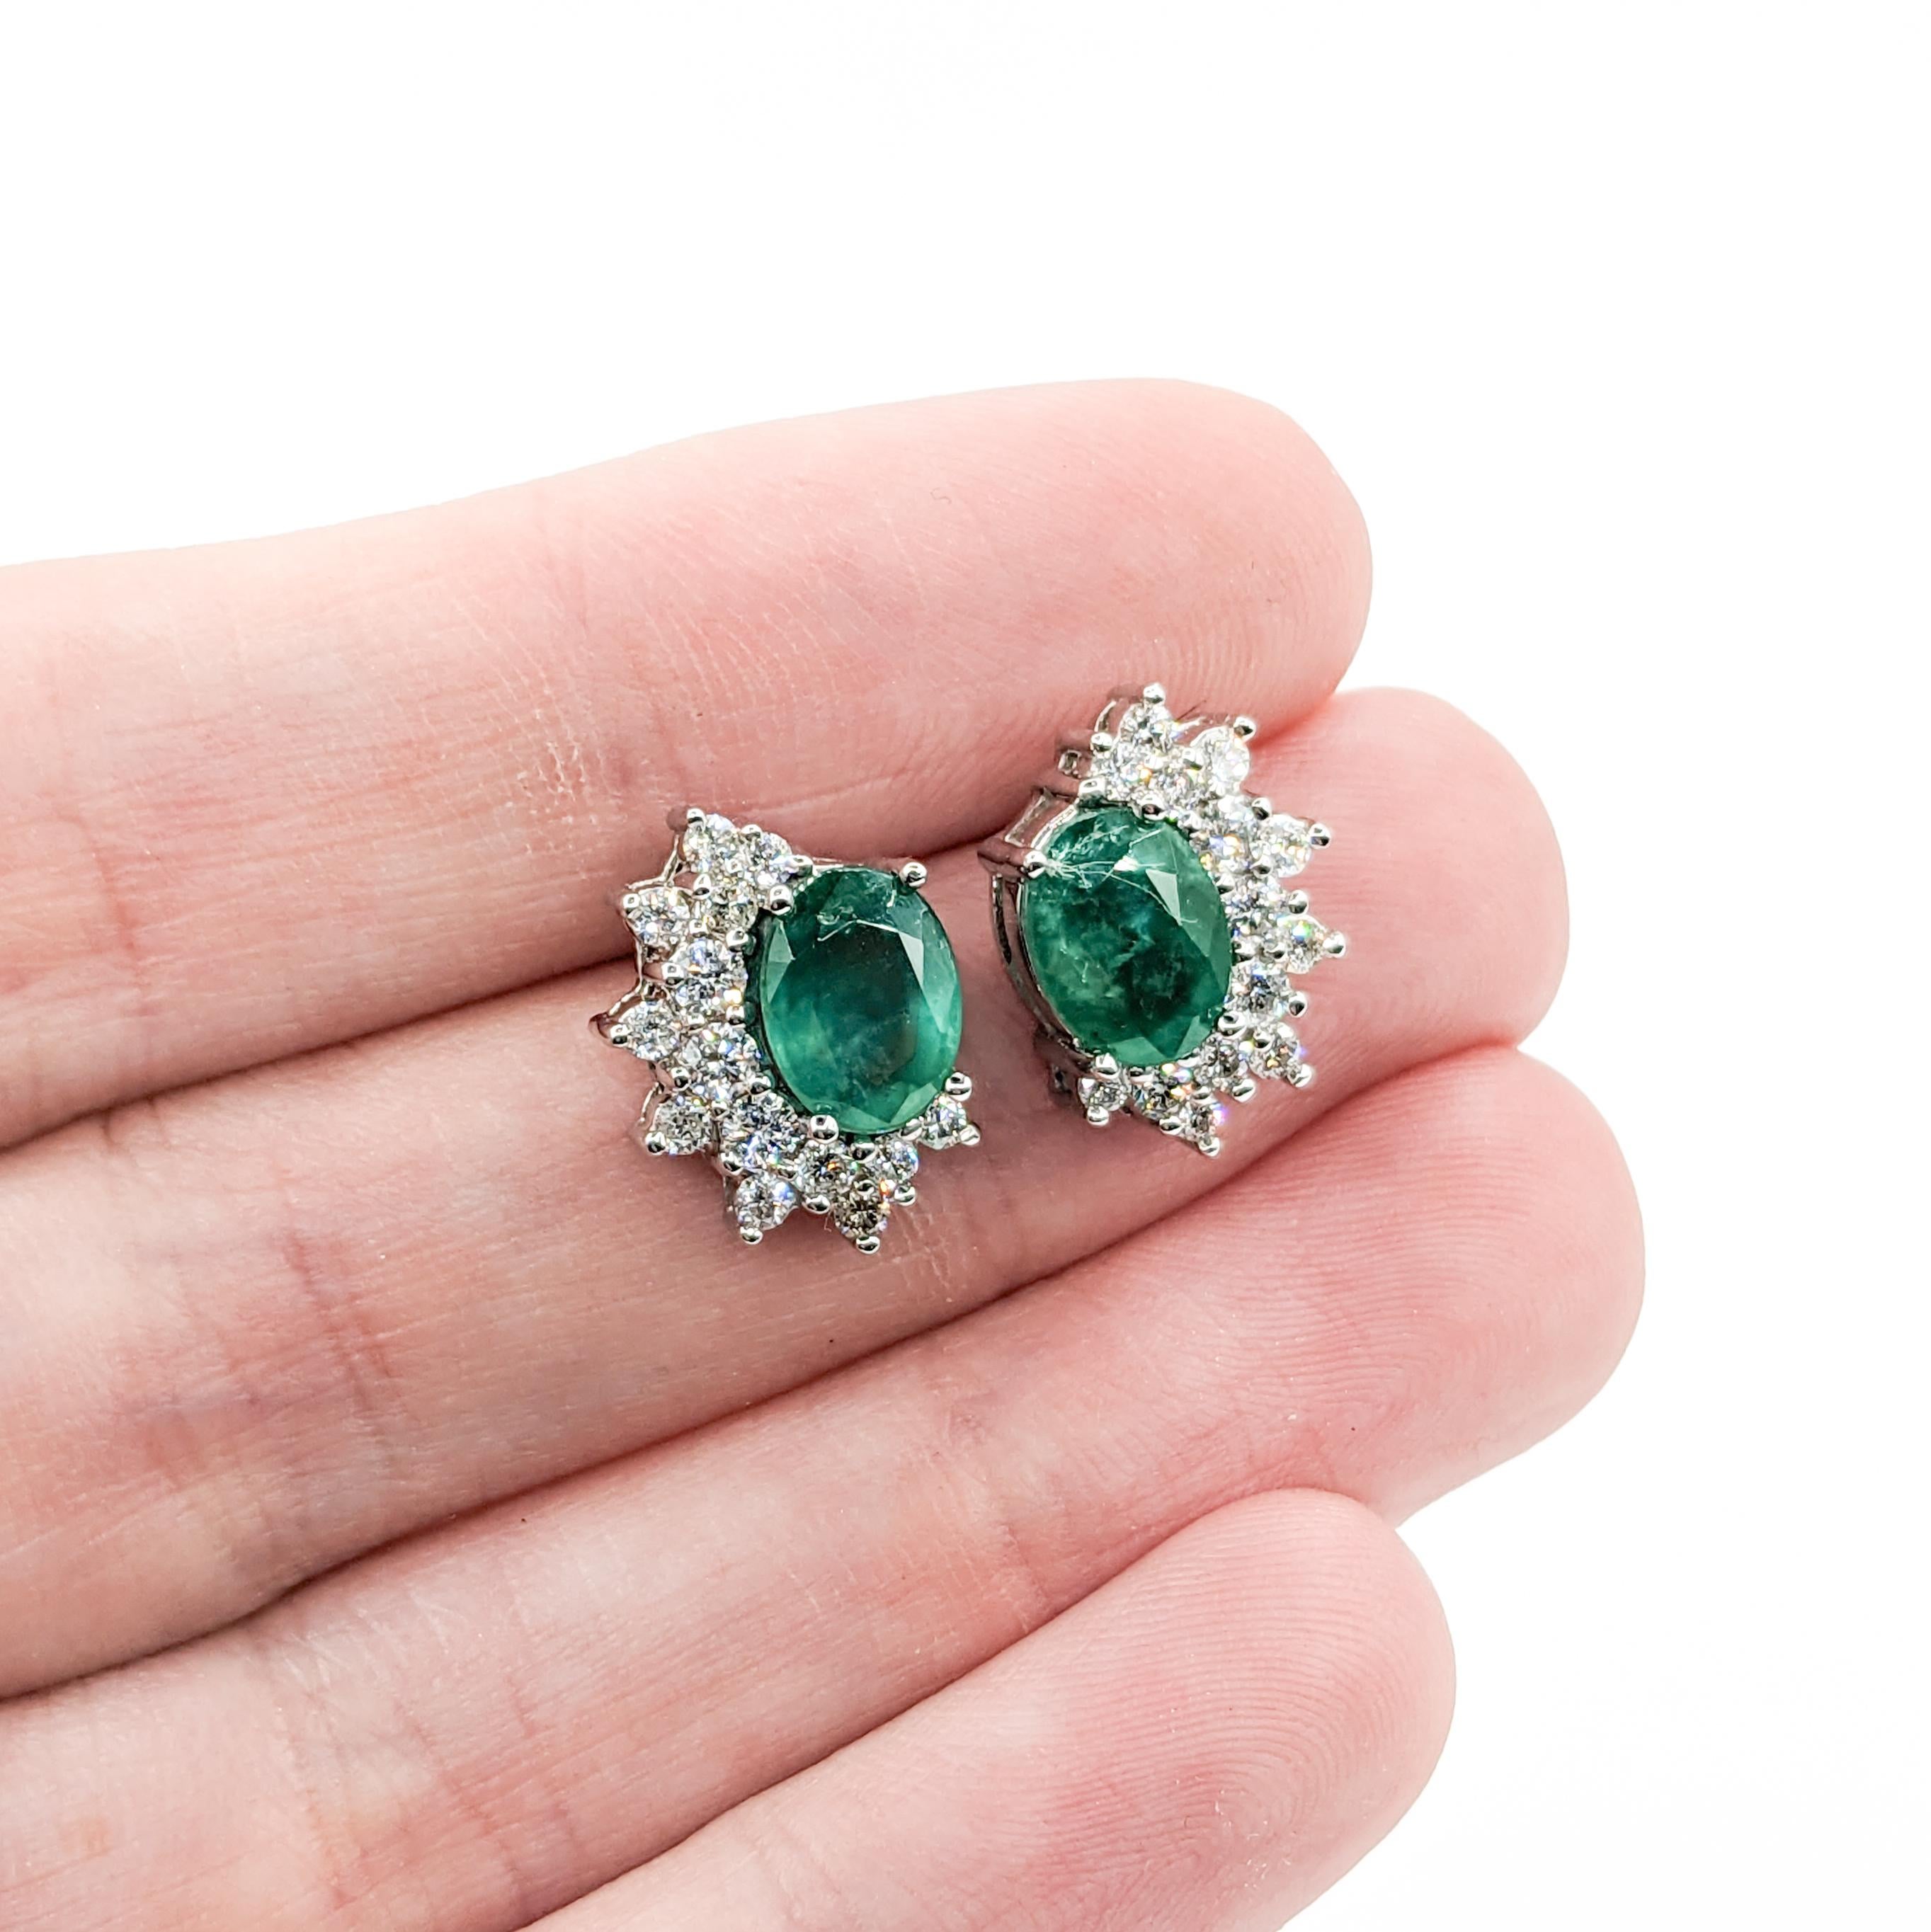 2.25ctw Emerald & Diamond Earrings In White Gold

Indulge in the radiance of these stunning earrings, exquisitely crafted from 14kt White Gold. They boast .52ctw of shimmering round diamonds with SI2 clarity and H-I color, enhancing their sparkle.